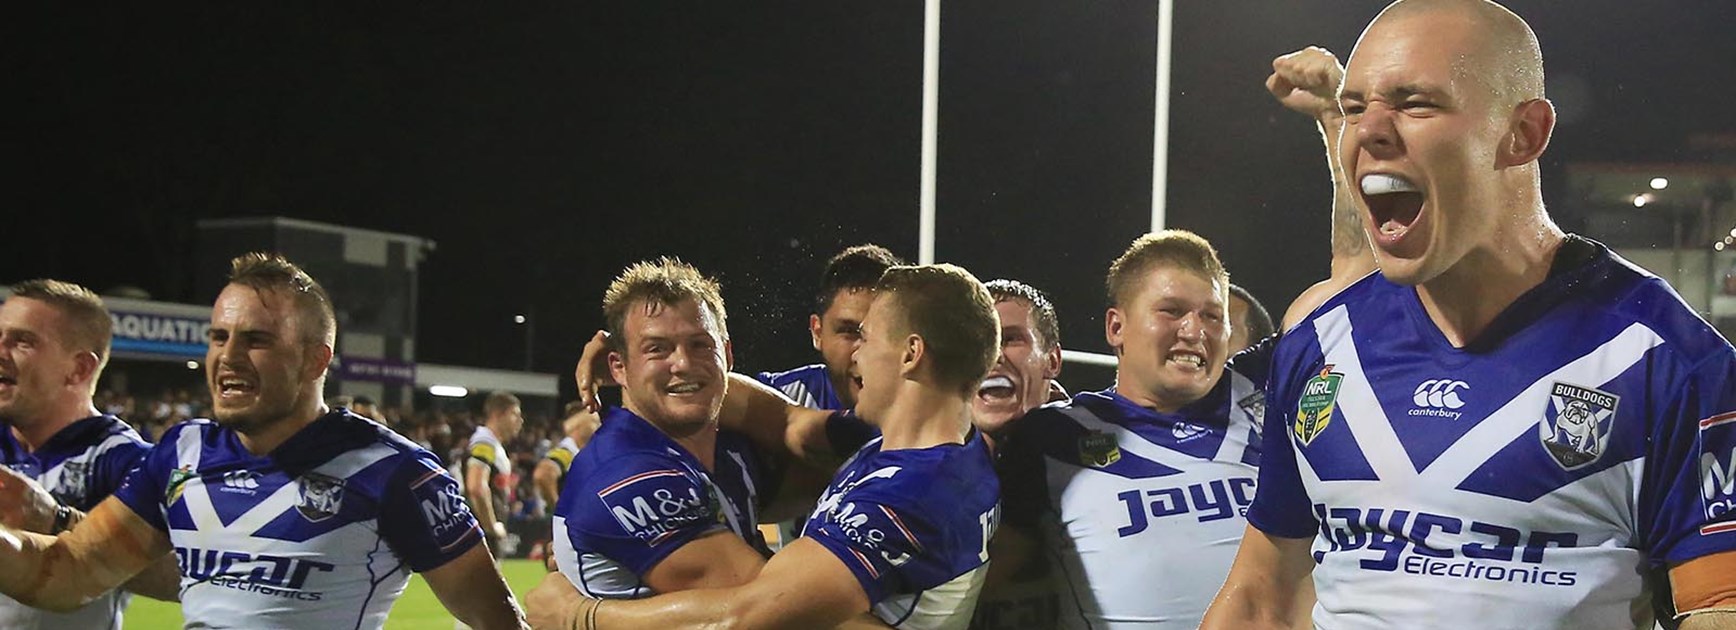 Bulldogs players celebrate their dramatic late win over Penrith in Round 2.